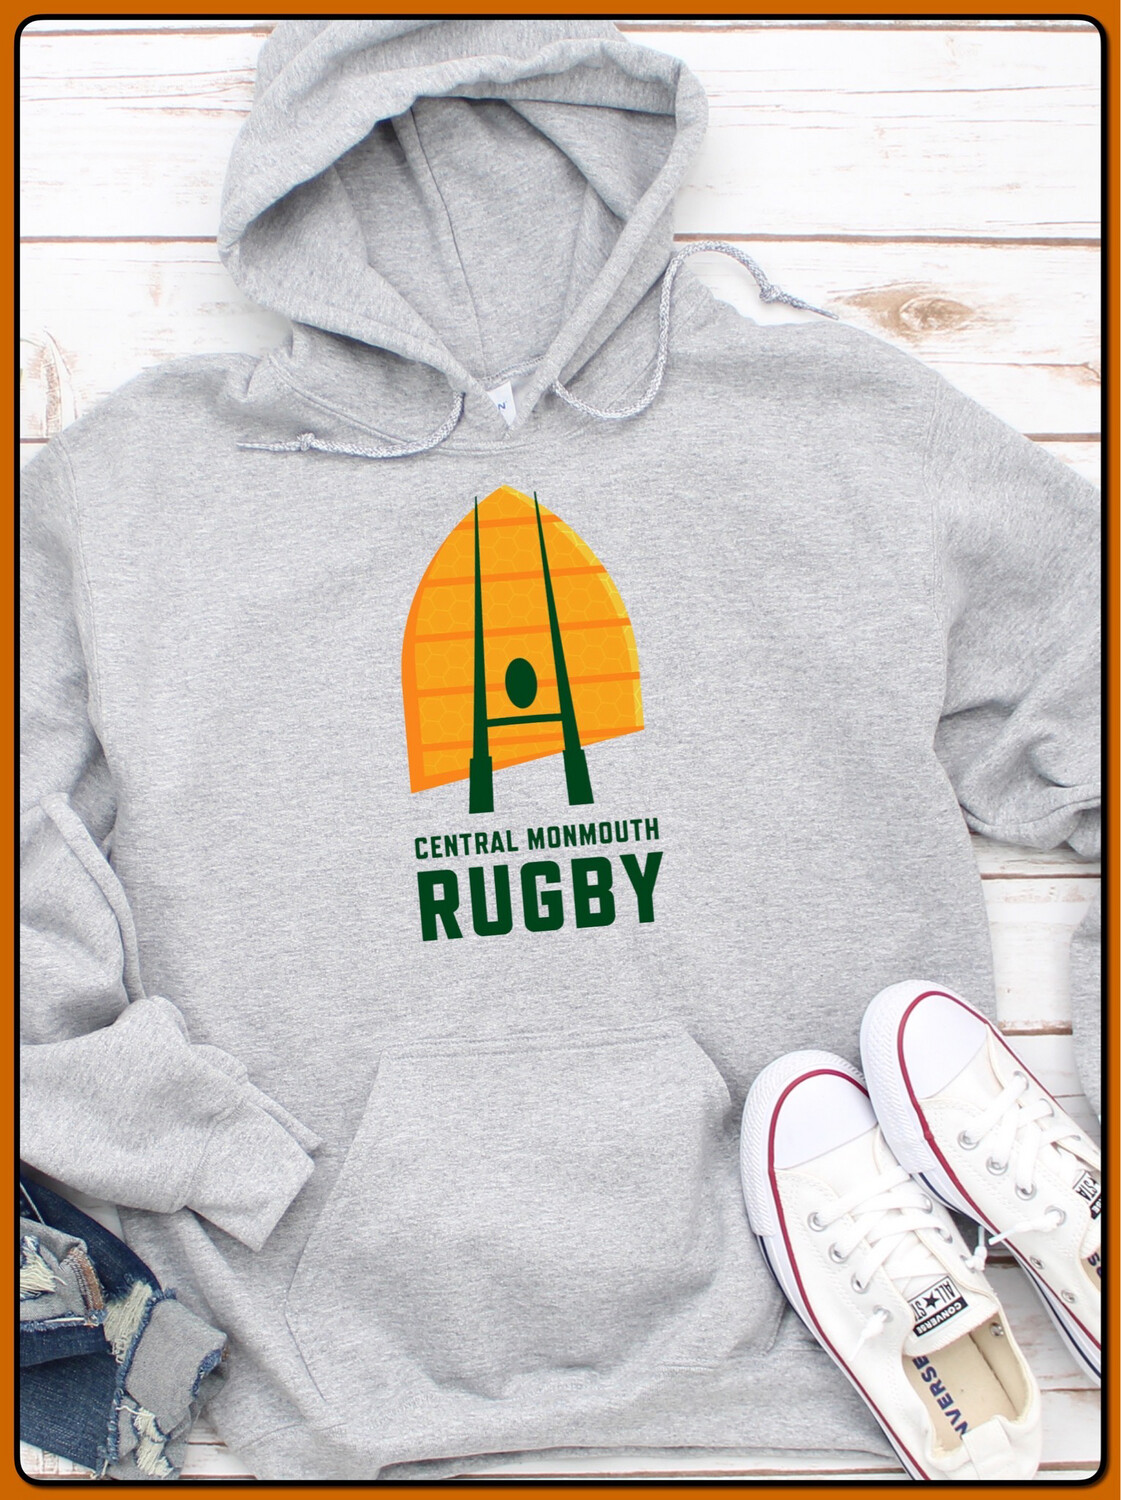 Central Monmouth Rugby Heather grey Sweatshirt ADULT &amp; YOUTH